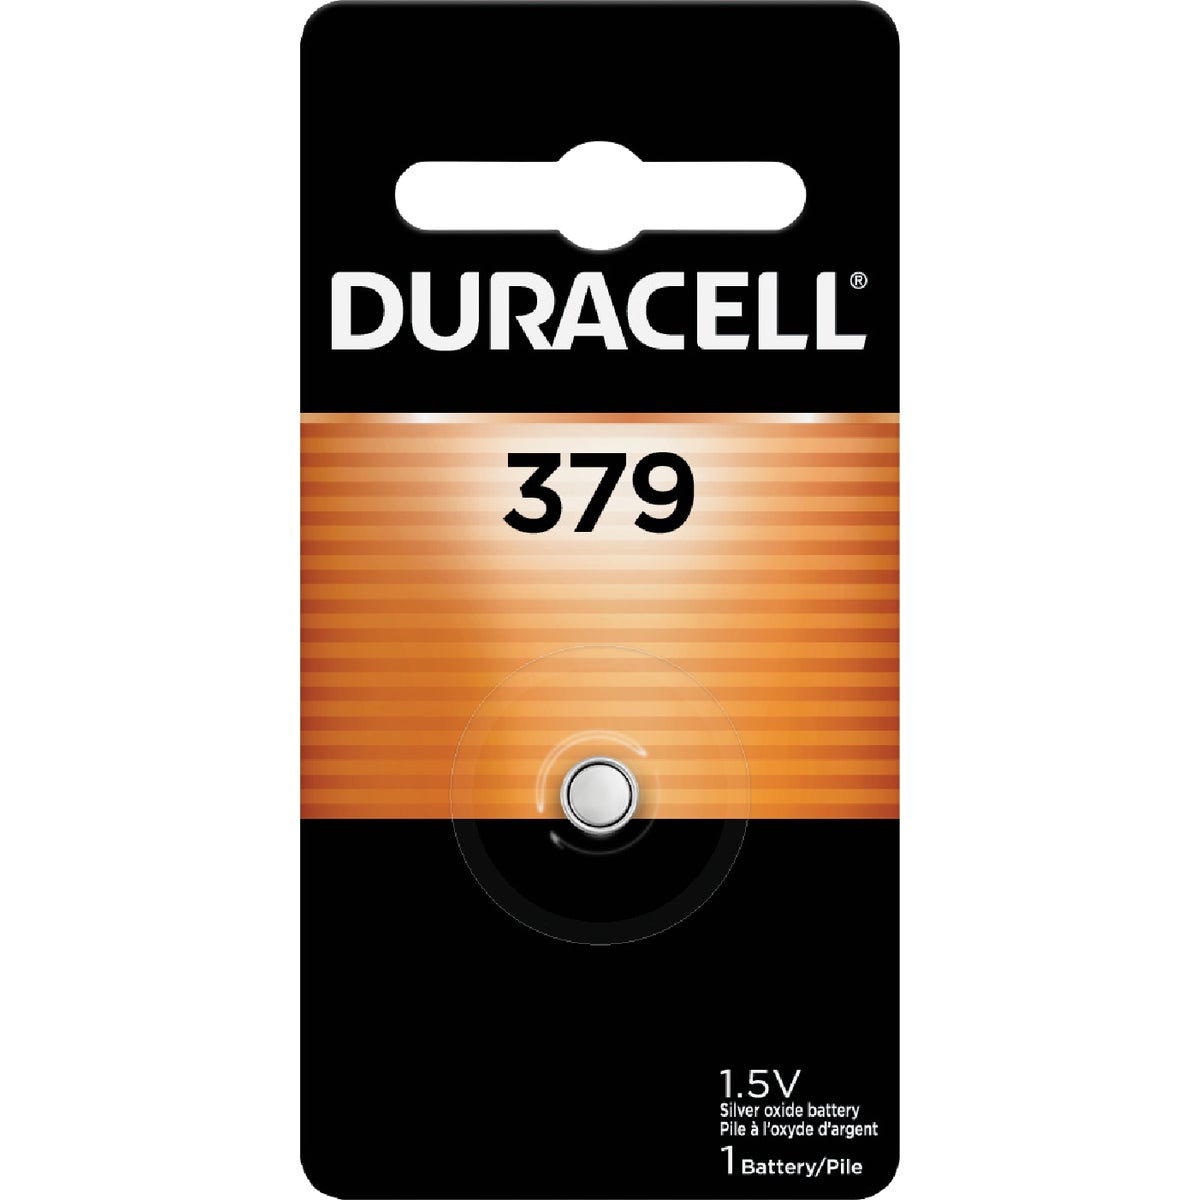 Duracell 379 Silver Oxide Button Cell Battery